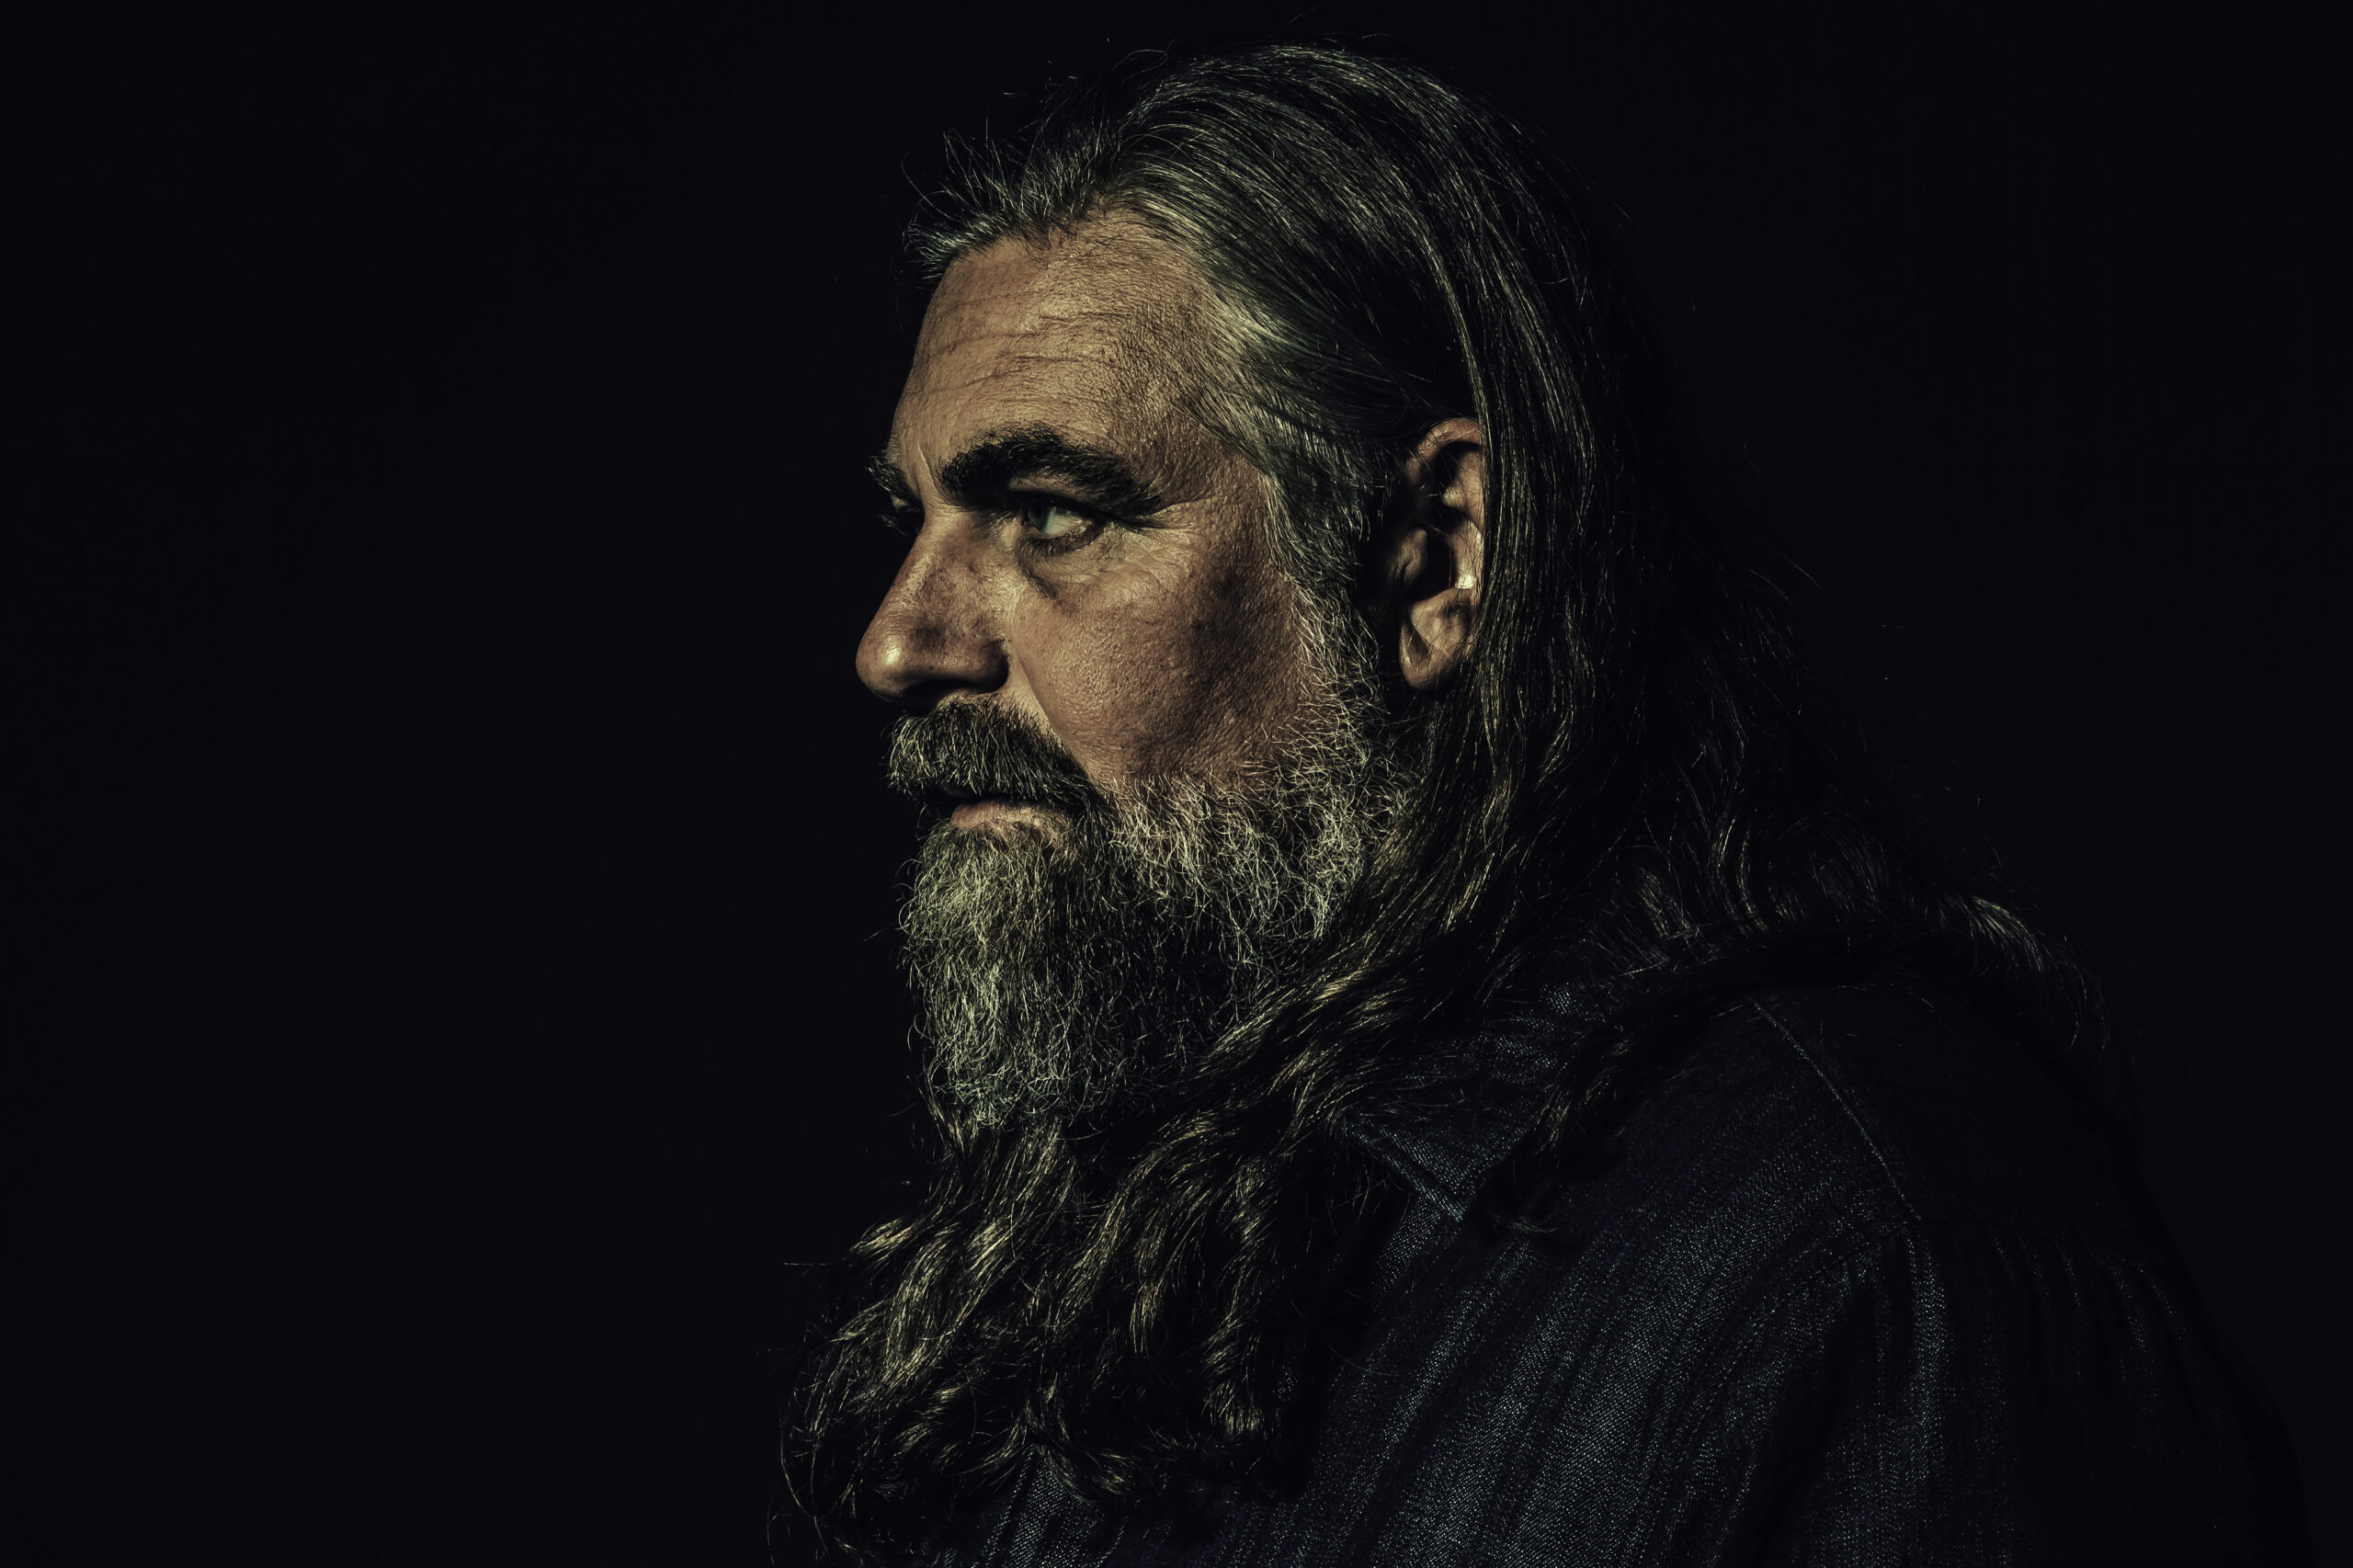 THE WHITE BUFFALO RELEASES VIDEOS FOR SONGS OFF ACCLAIMED NEW ALBUM  ‘YEAR OF THE DARK HORSE’